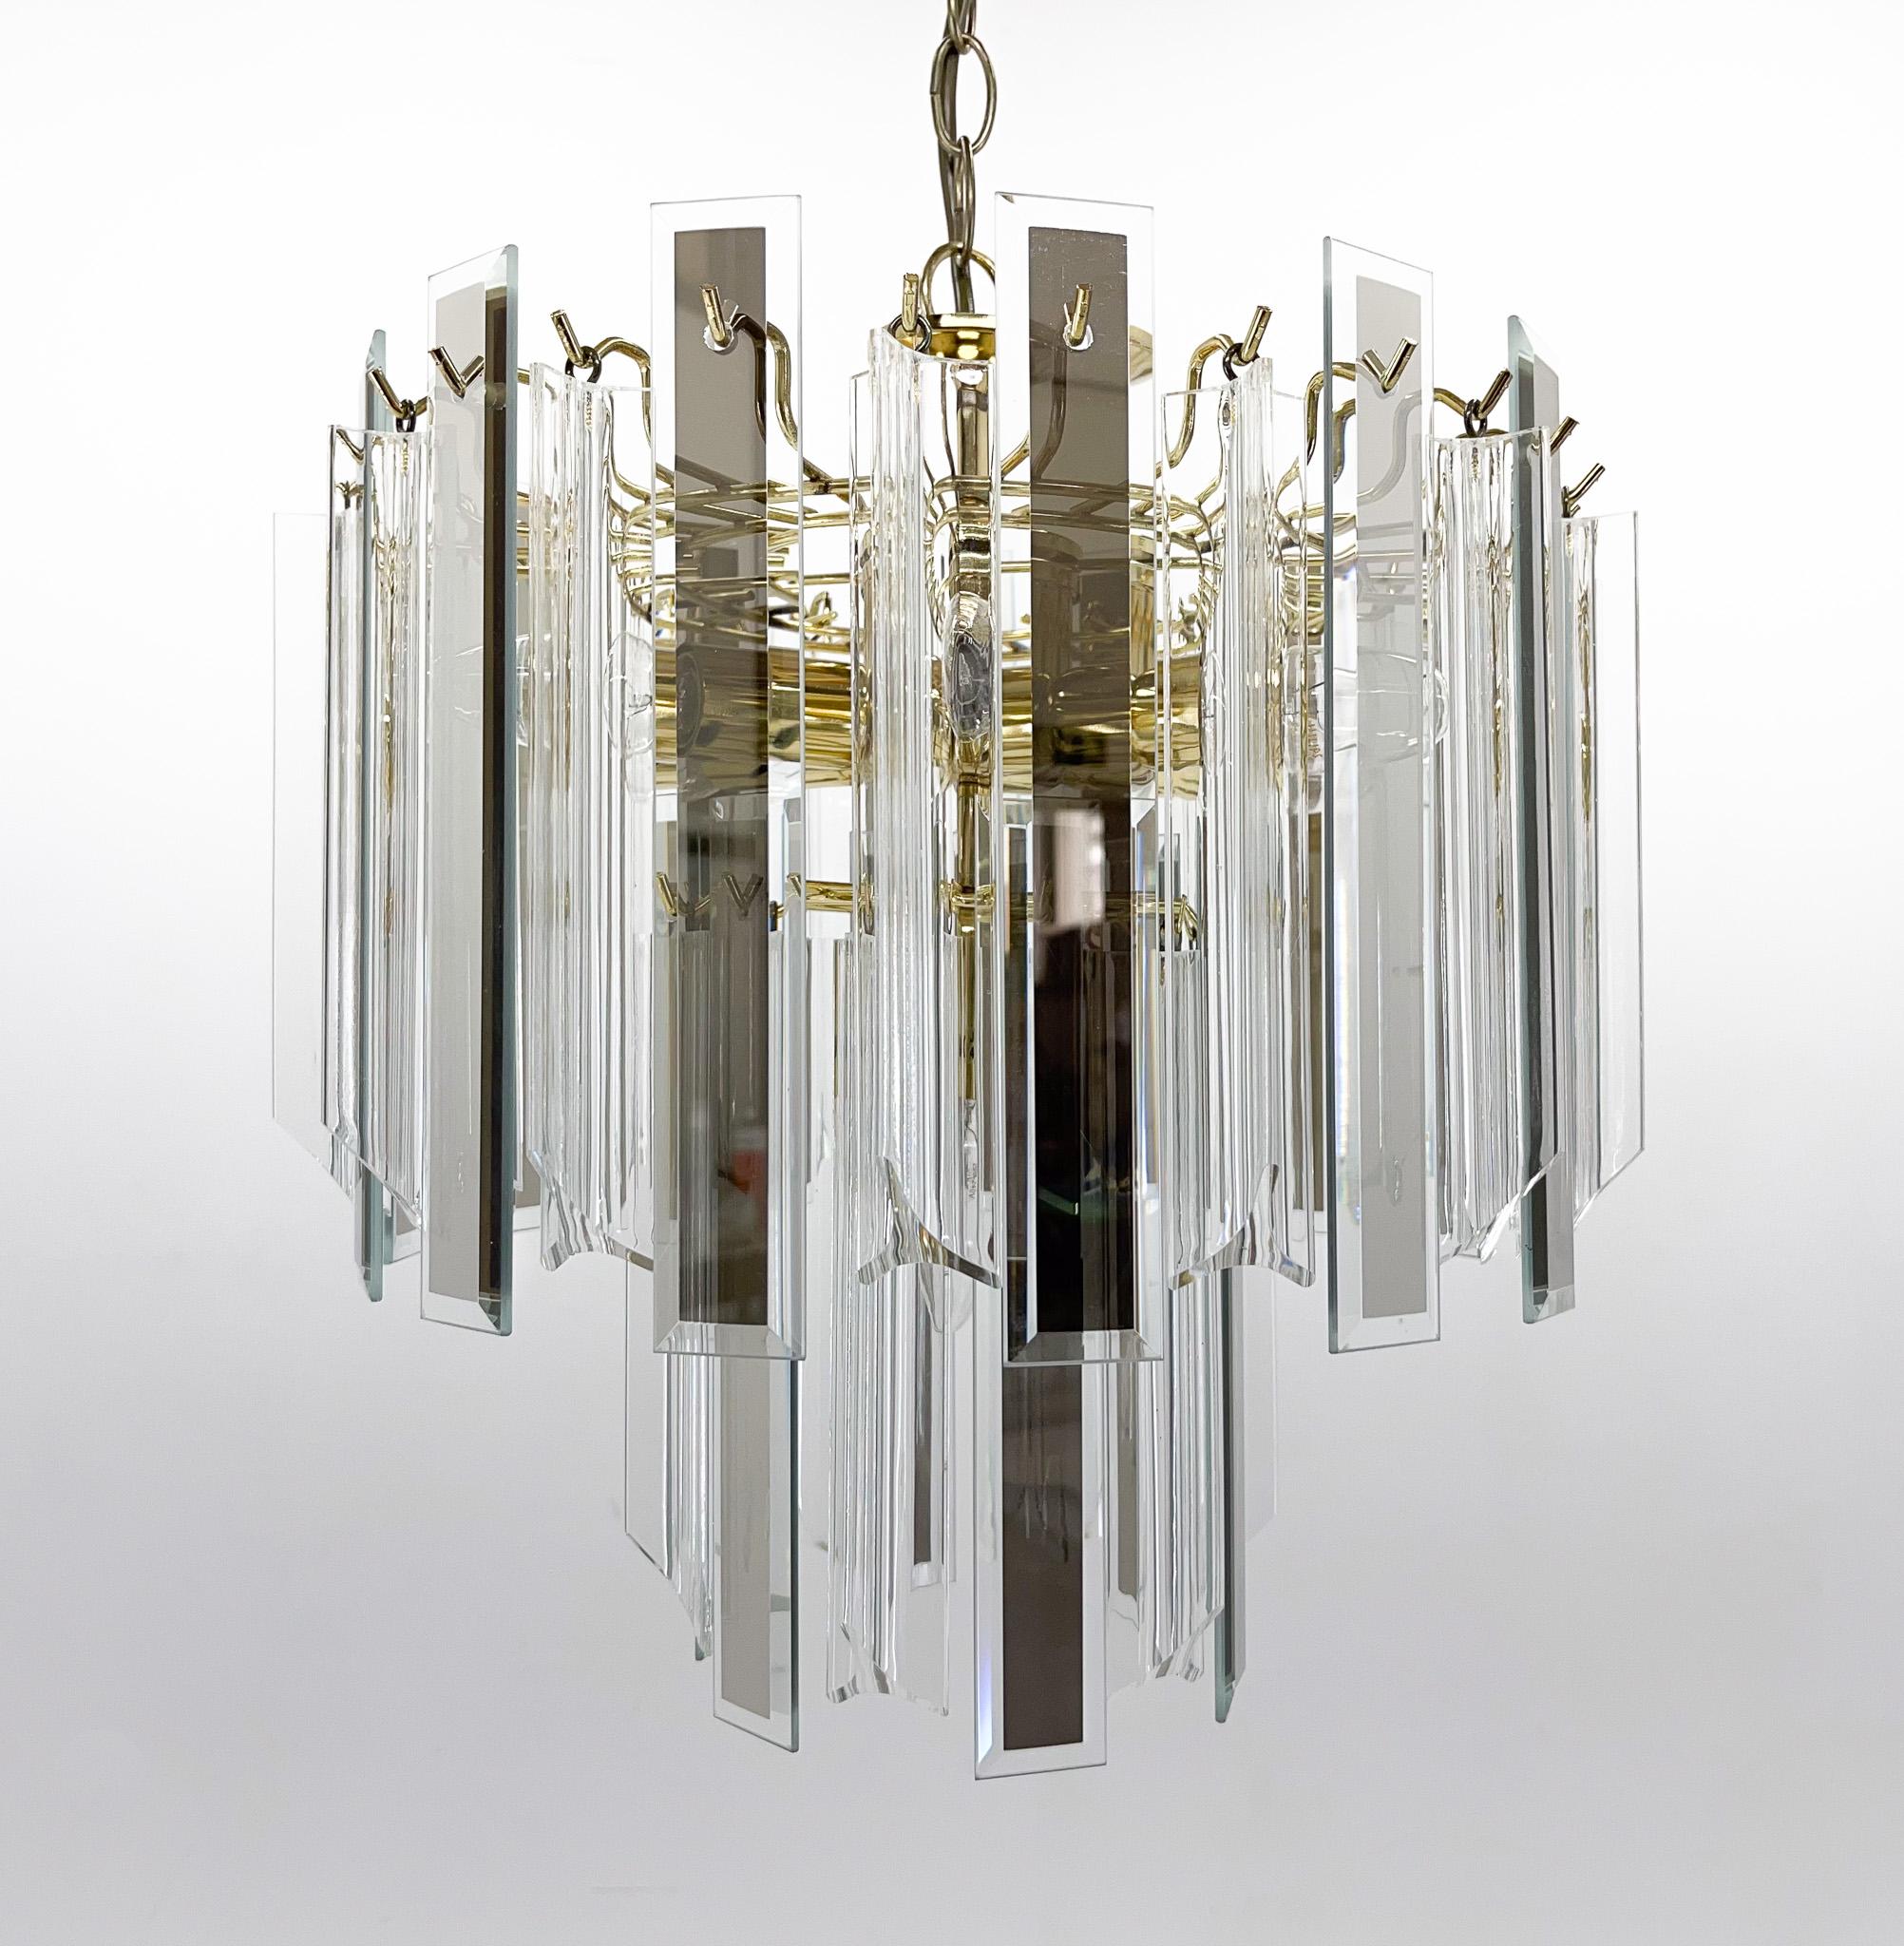 Midcentury Brass, Glass and Lucite Chandelier, Austria 1970s For Sale 1